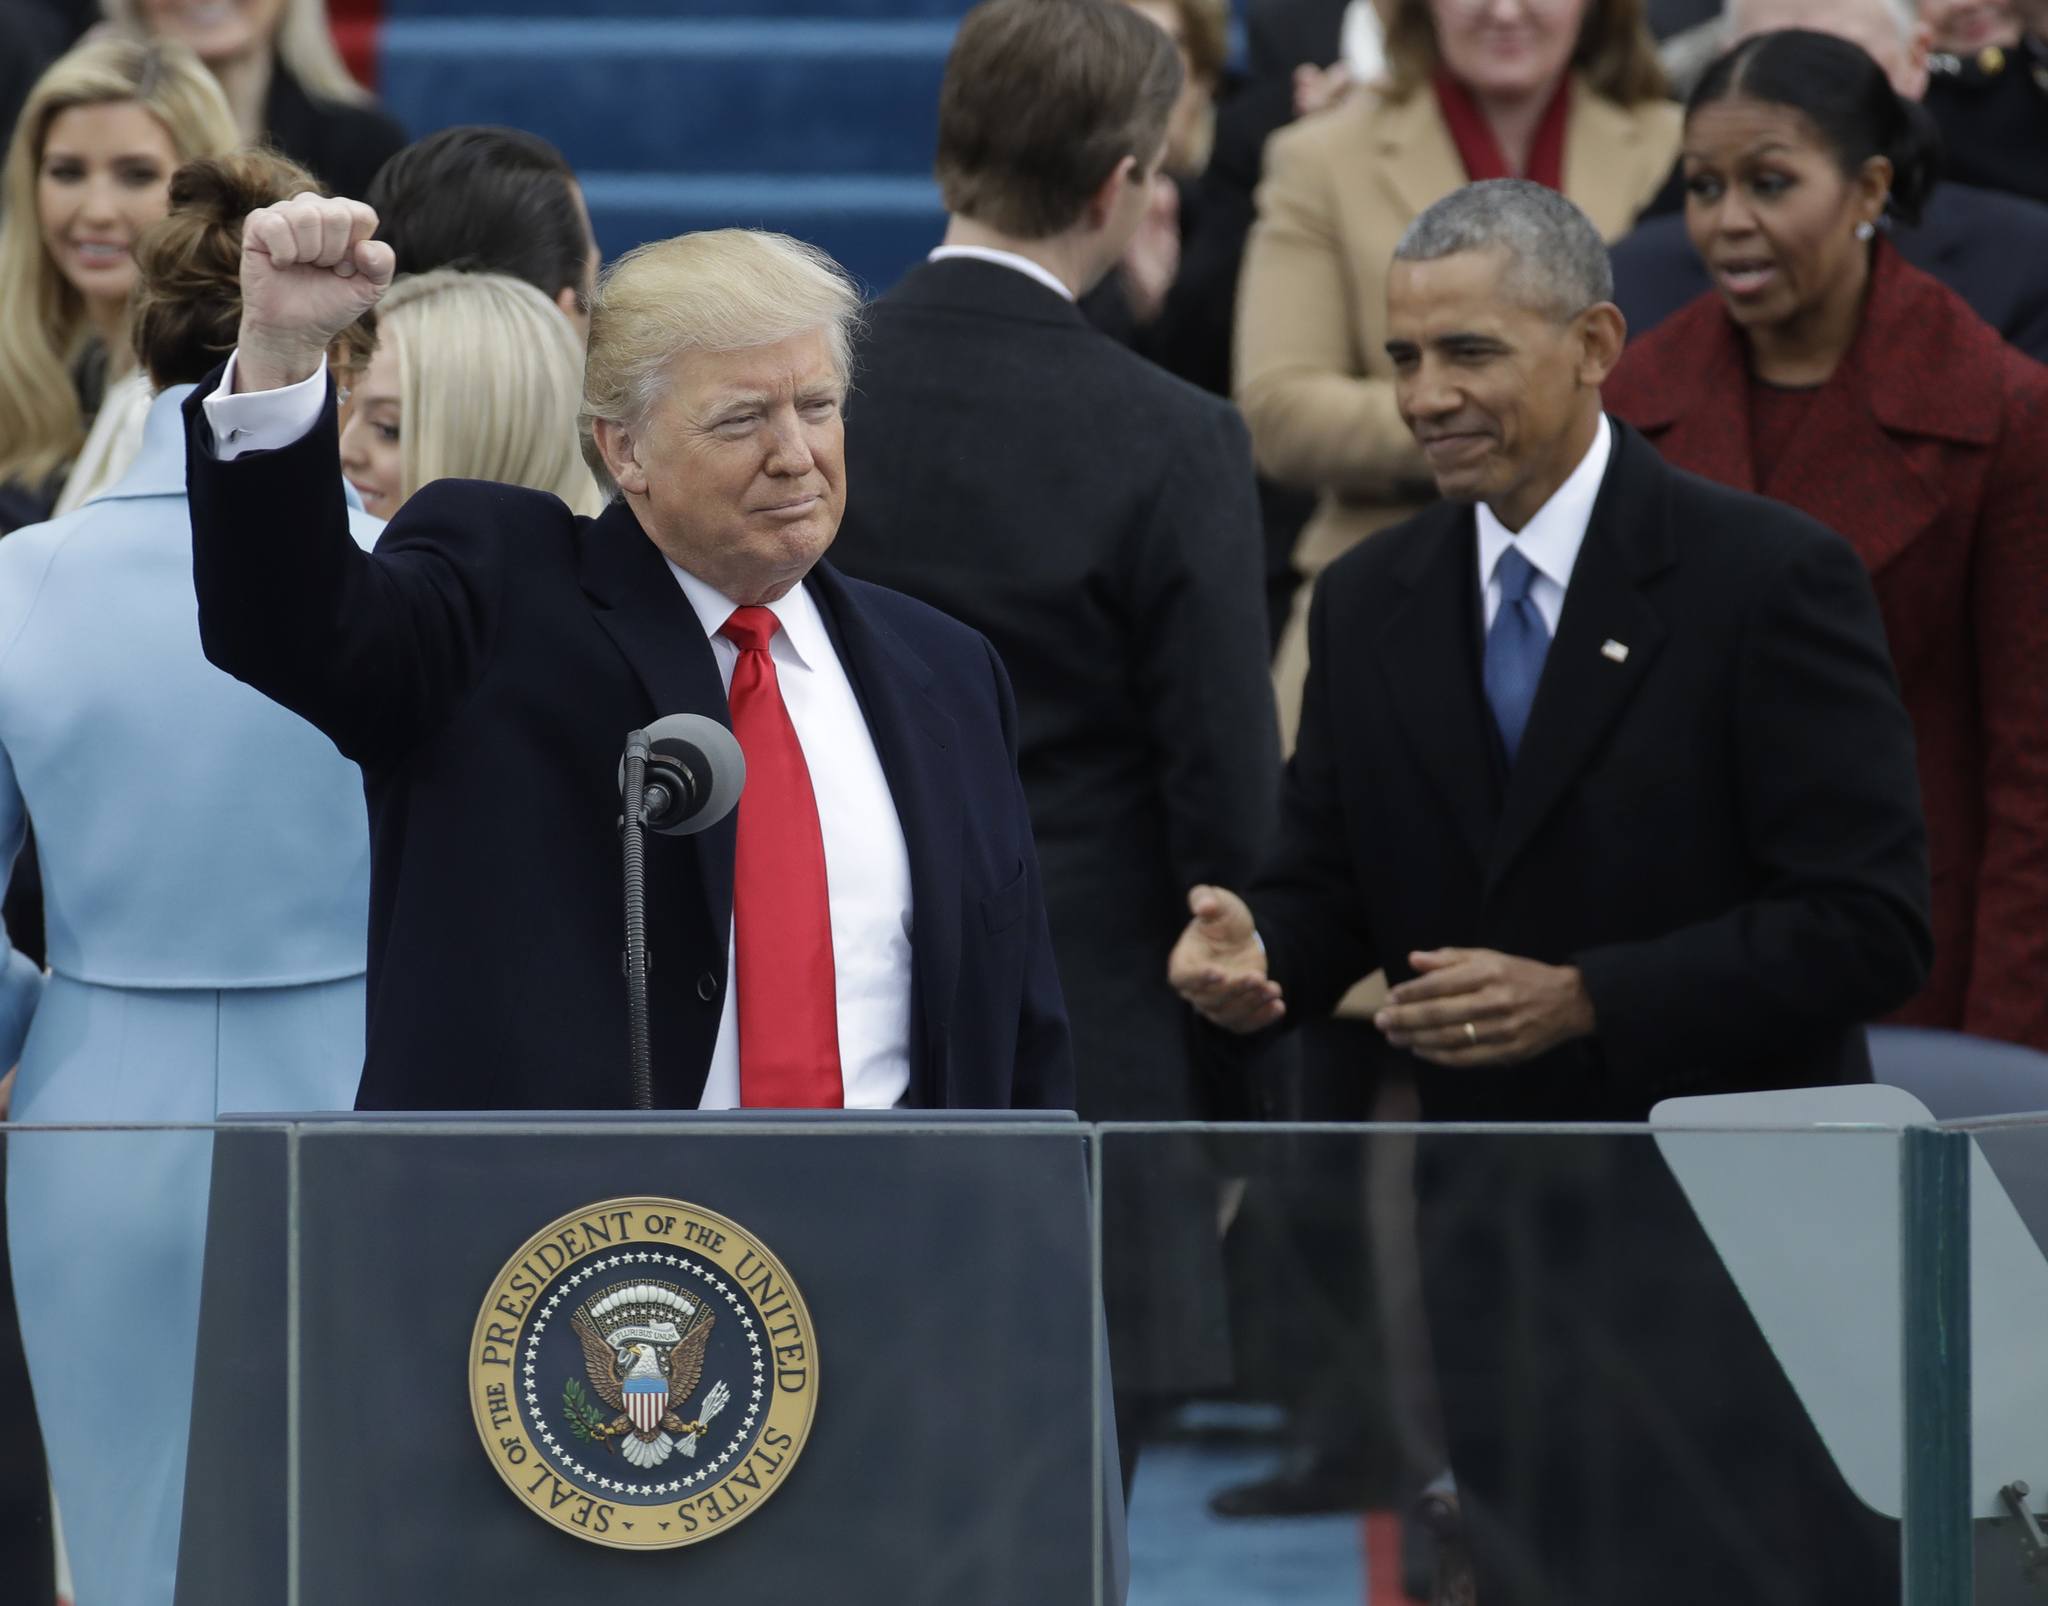 President Donald Trump waves after being sworn in as the 45th president of the United States during the 58th Presidential Inauguration at the U.S. Capitol in Washington, D.C. (The Associated Press)